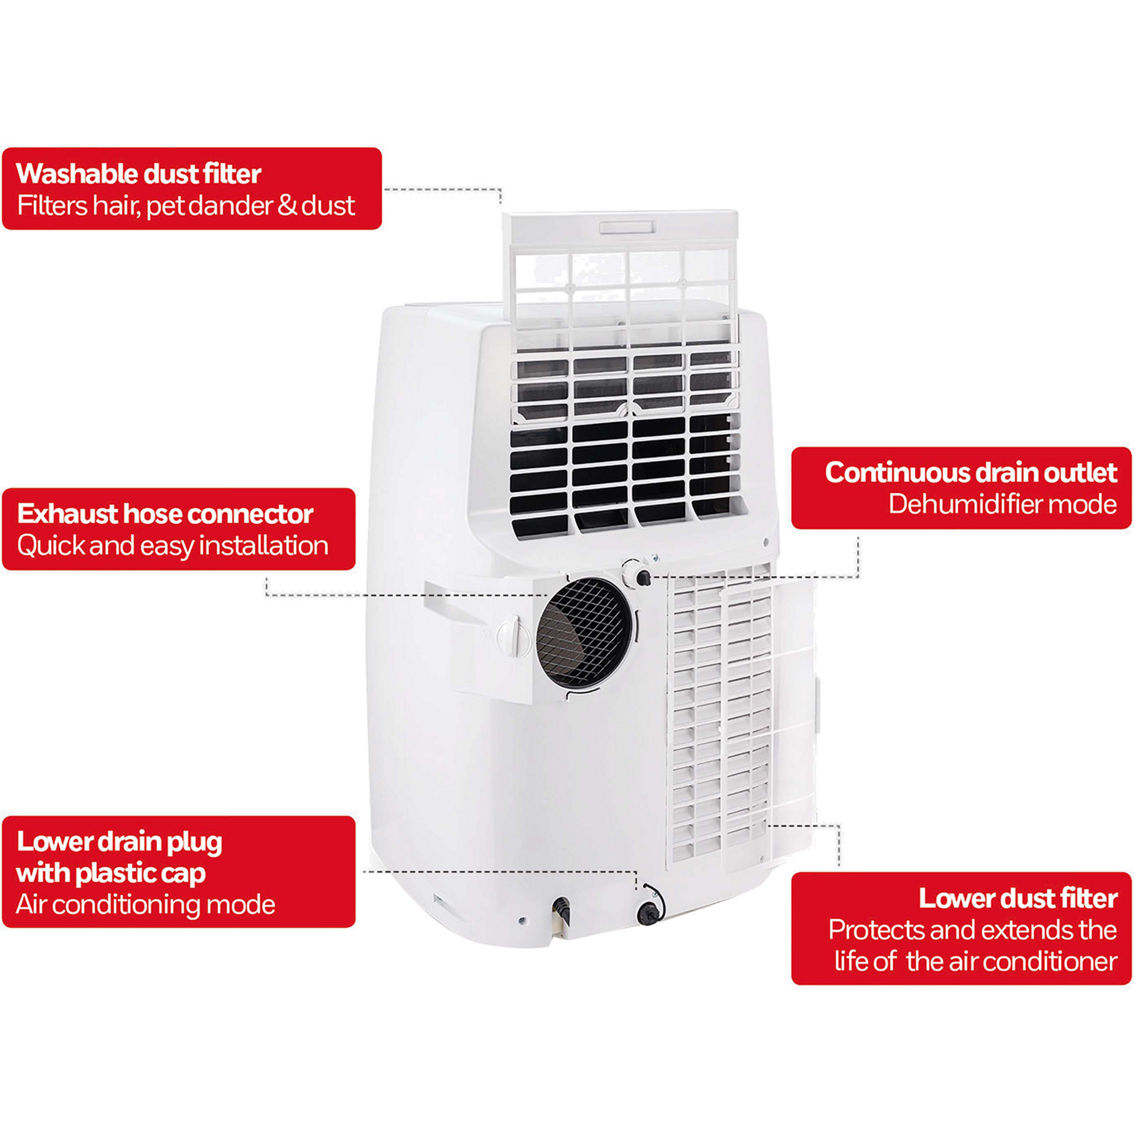 Honeywell 14,000 BTU Portable Air Conditioner, Dehumidifier and Fan - Image 3 of 6